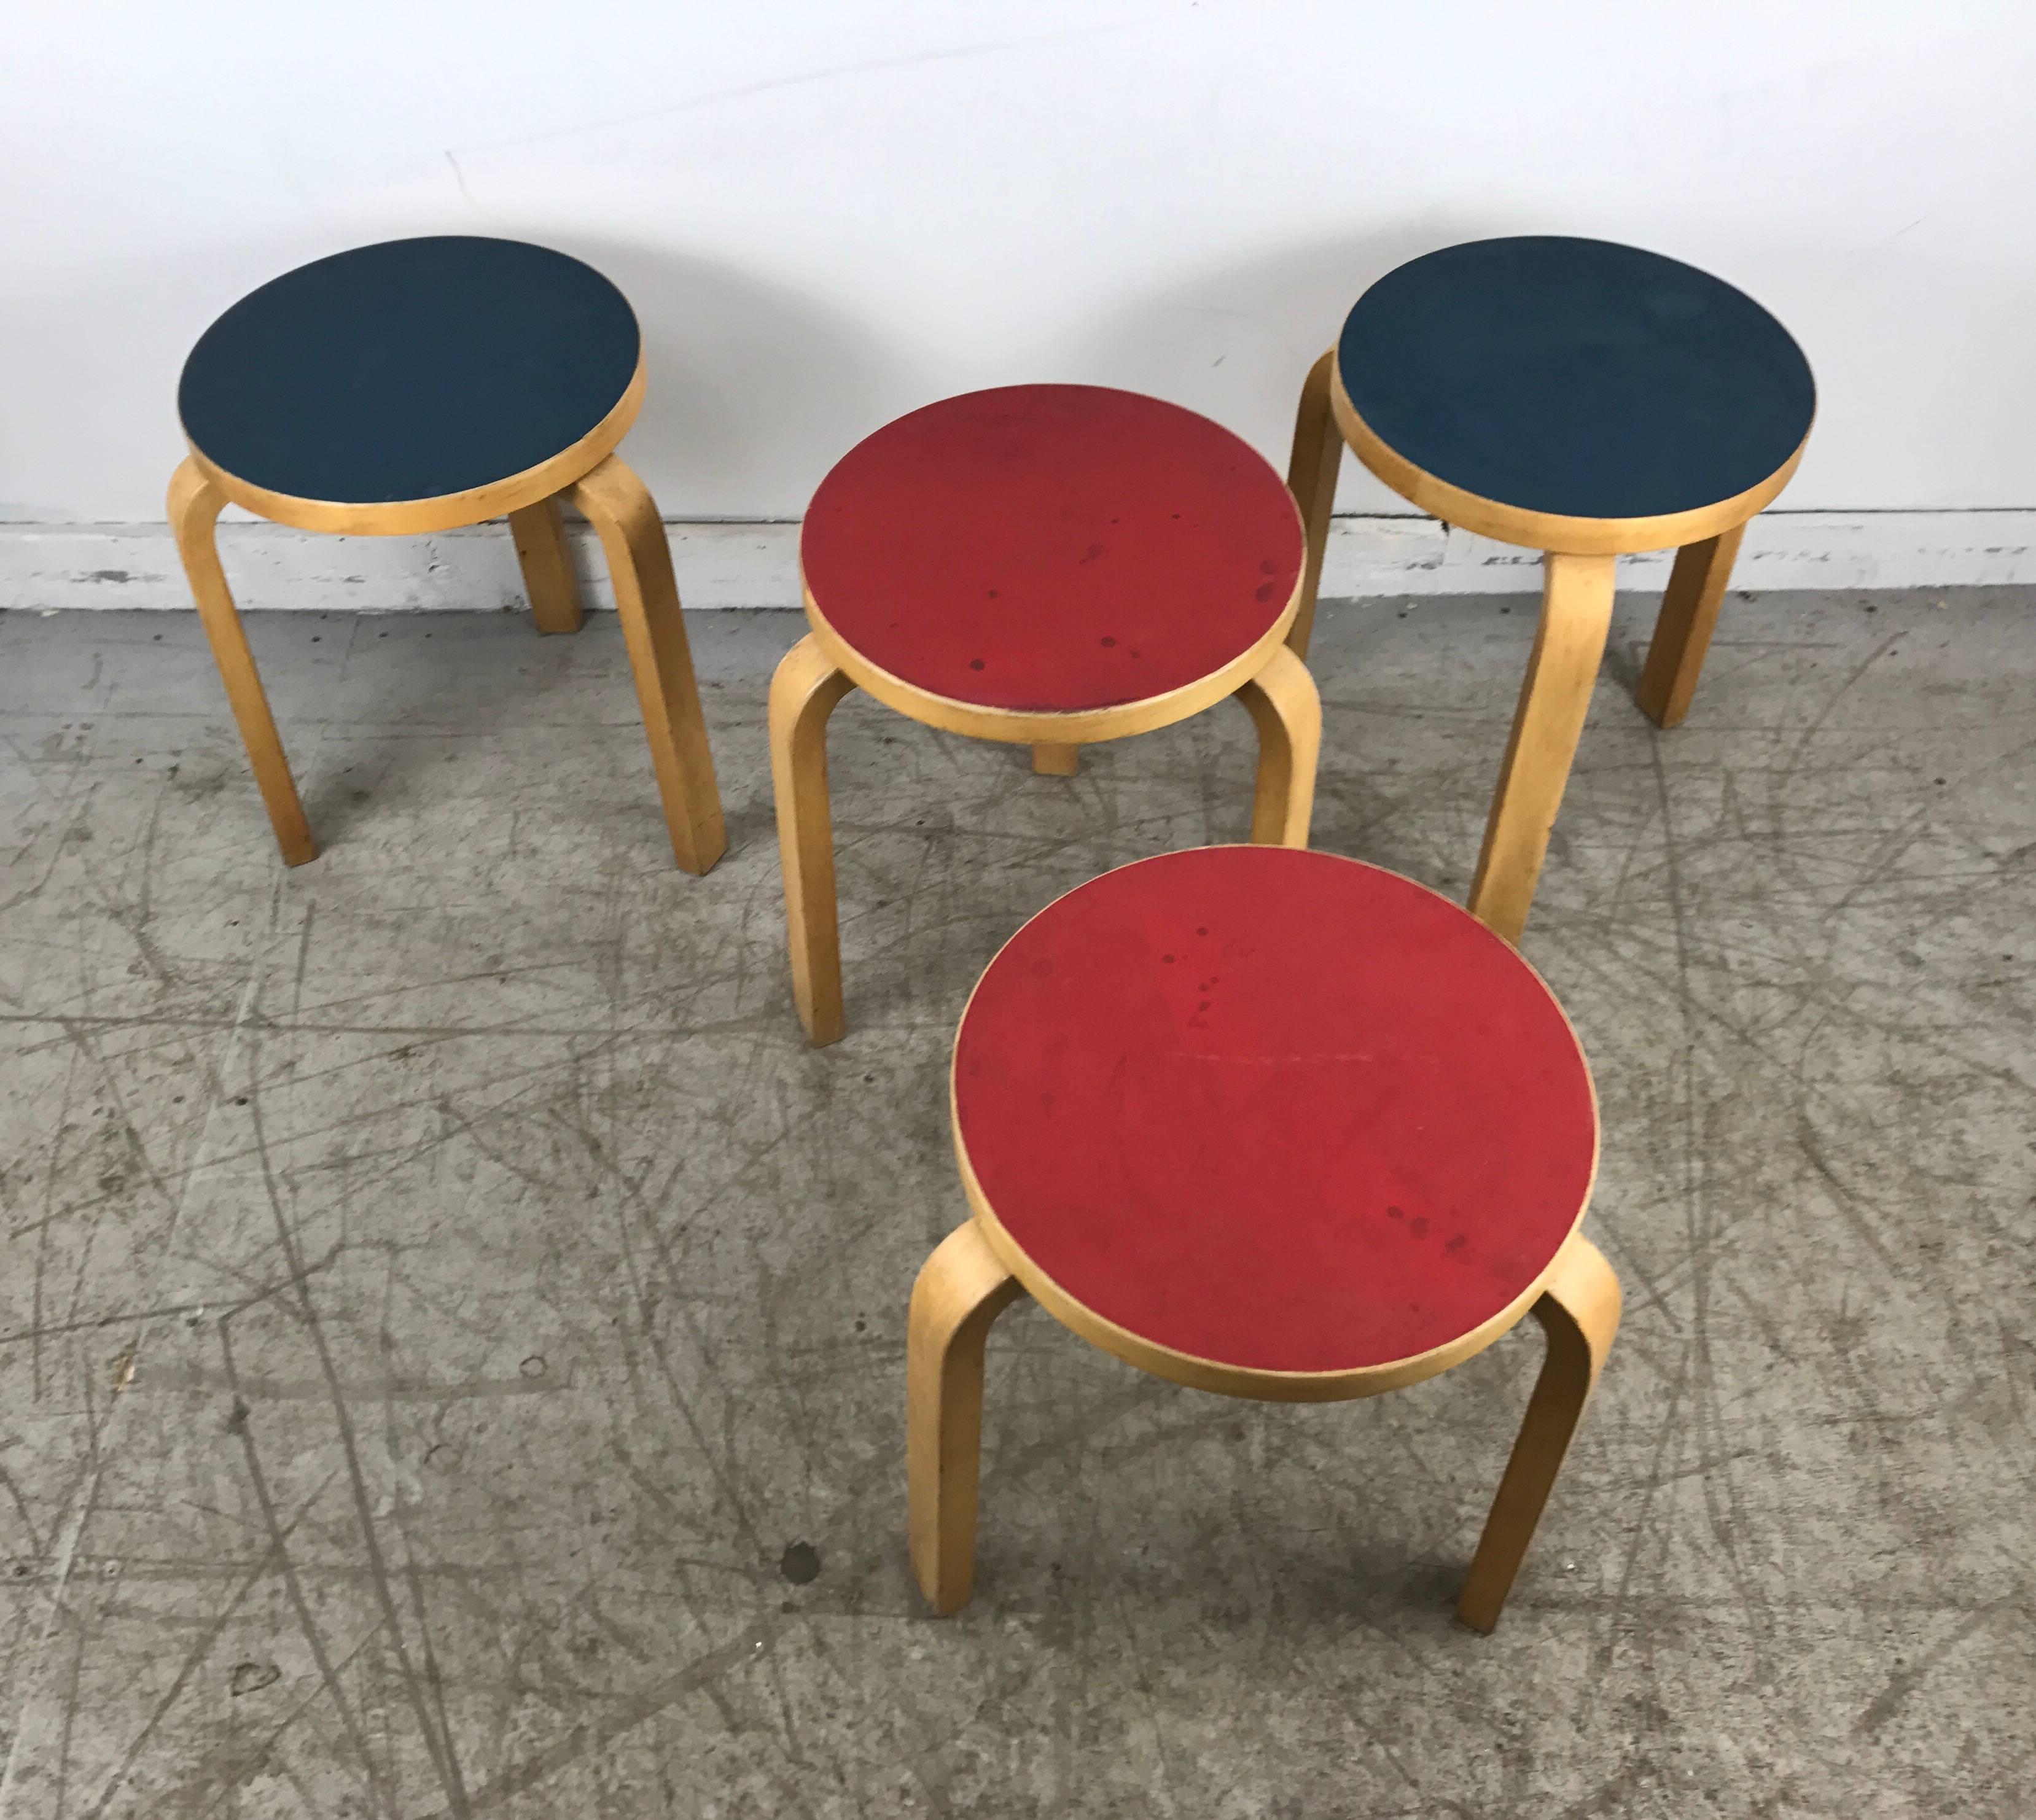 Four stacking stools, model 60 by Alvar Aalto, original beechwood, with original thin laminate / linoleum tops, two blue, two red.